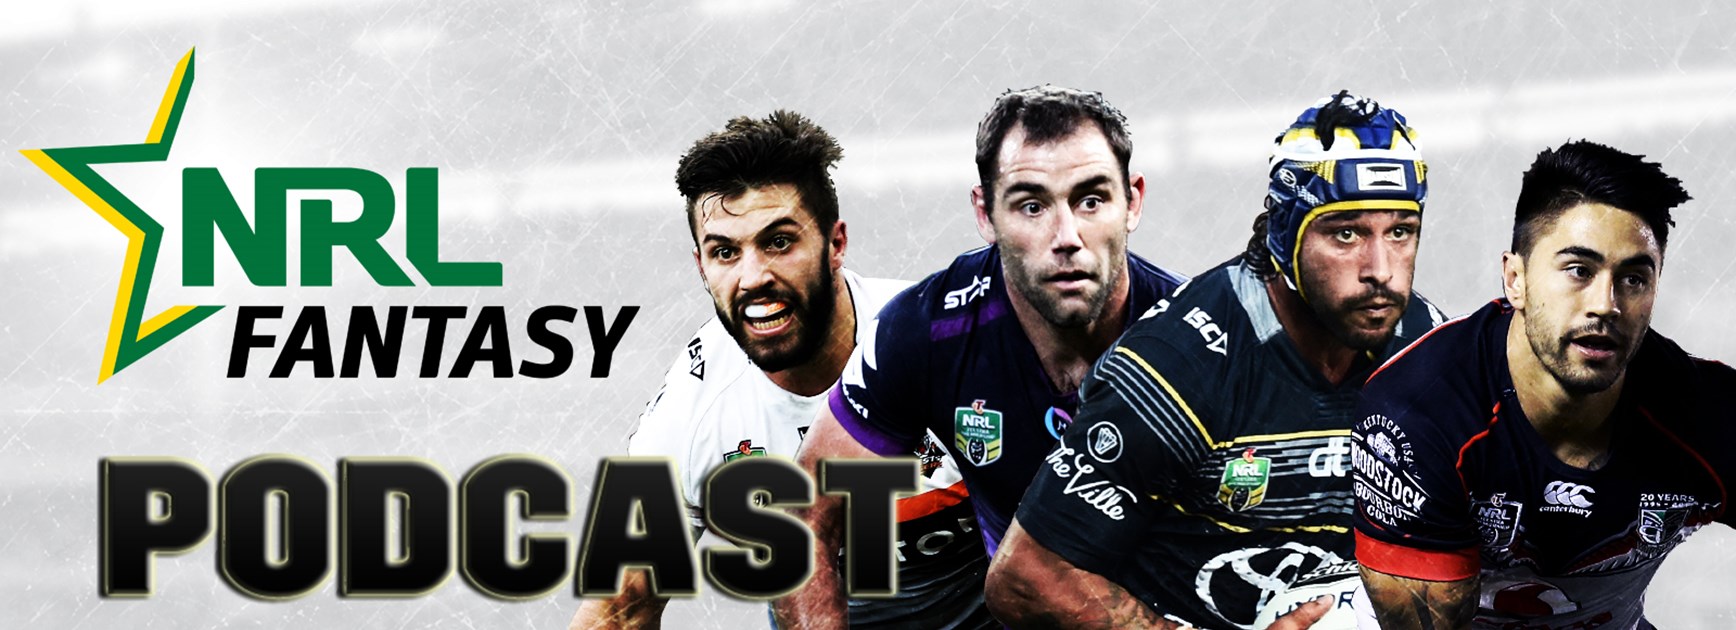 The NRL Fantasy Podcast has launched, who will you have in your team?